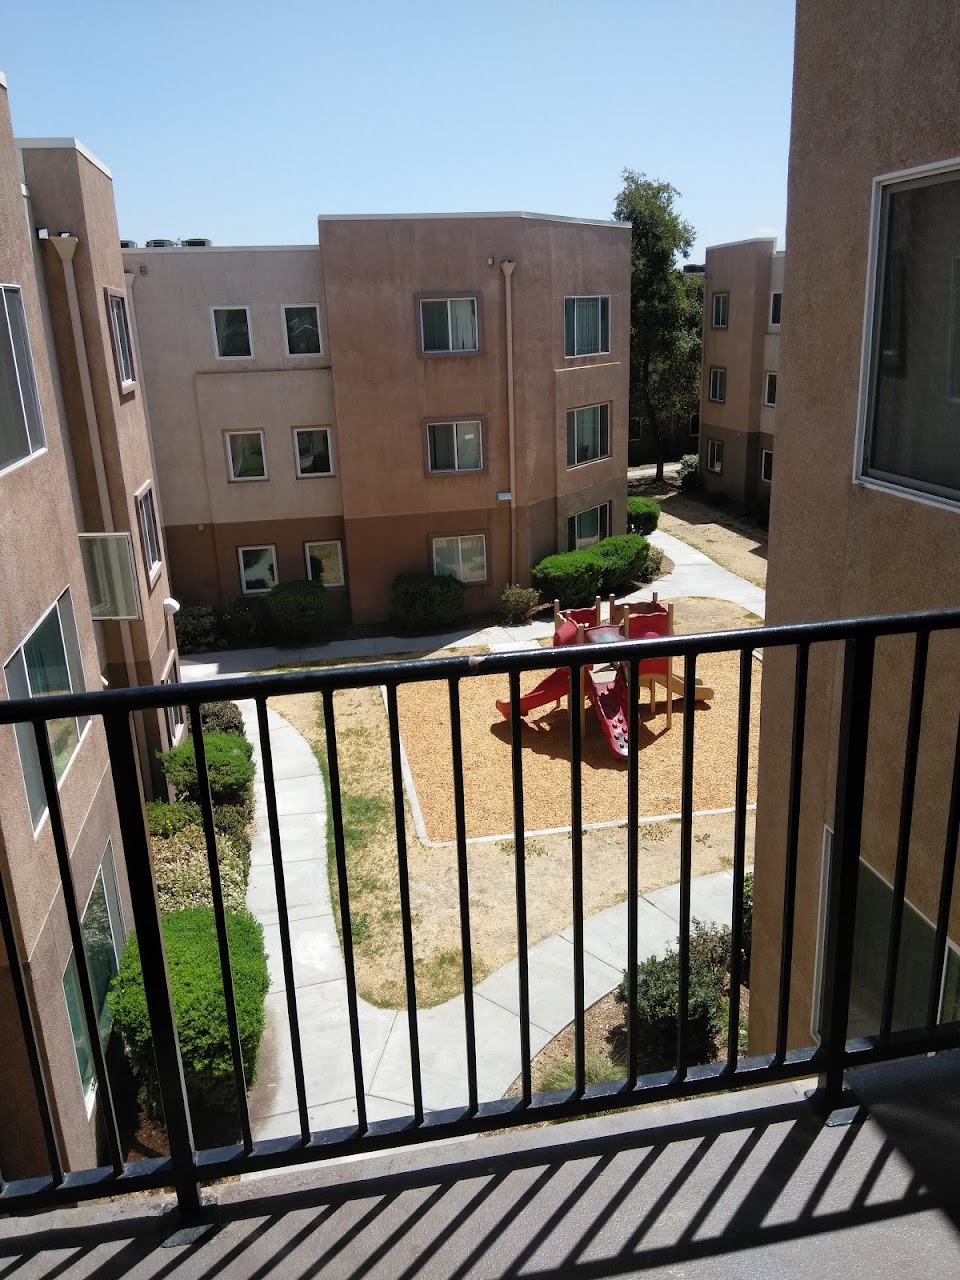 Photo of CAMELLIA PLACE (BAKERSFIELD). Affordable housing located at 1855 CHEATHAM AVE BAKERSFIELD, CA 